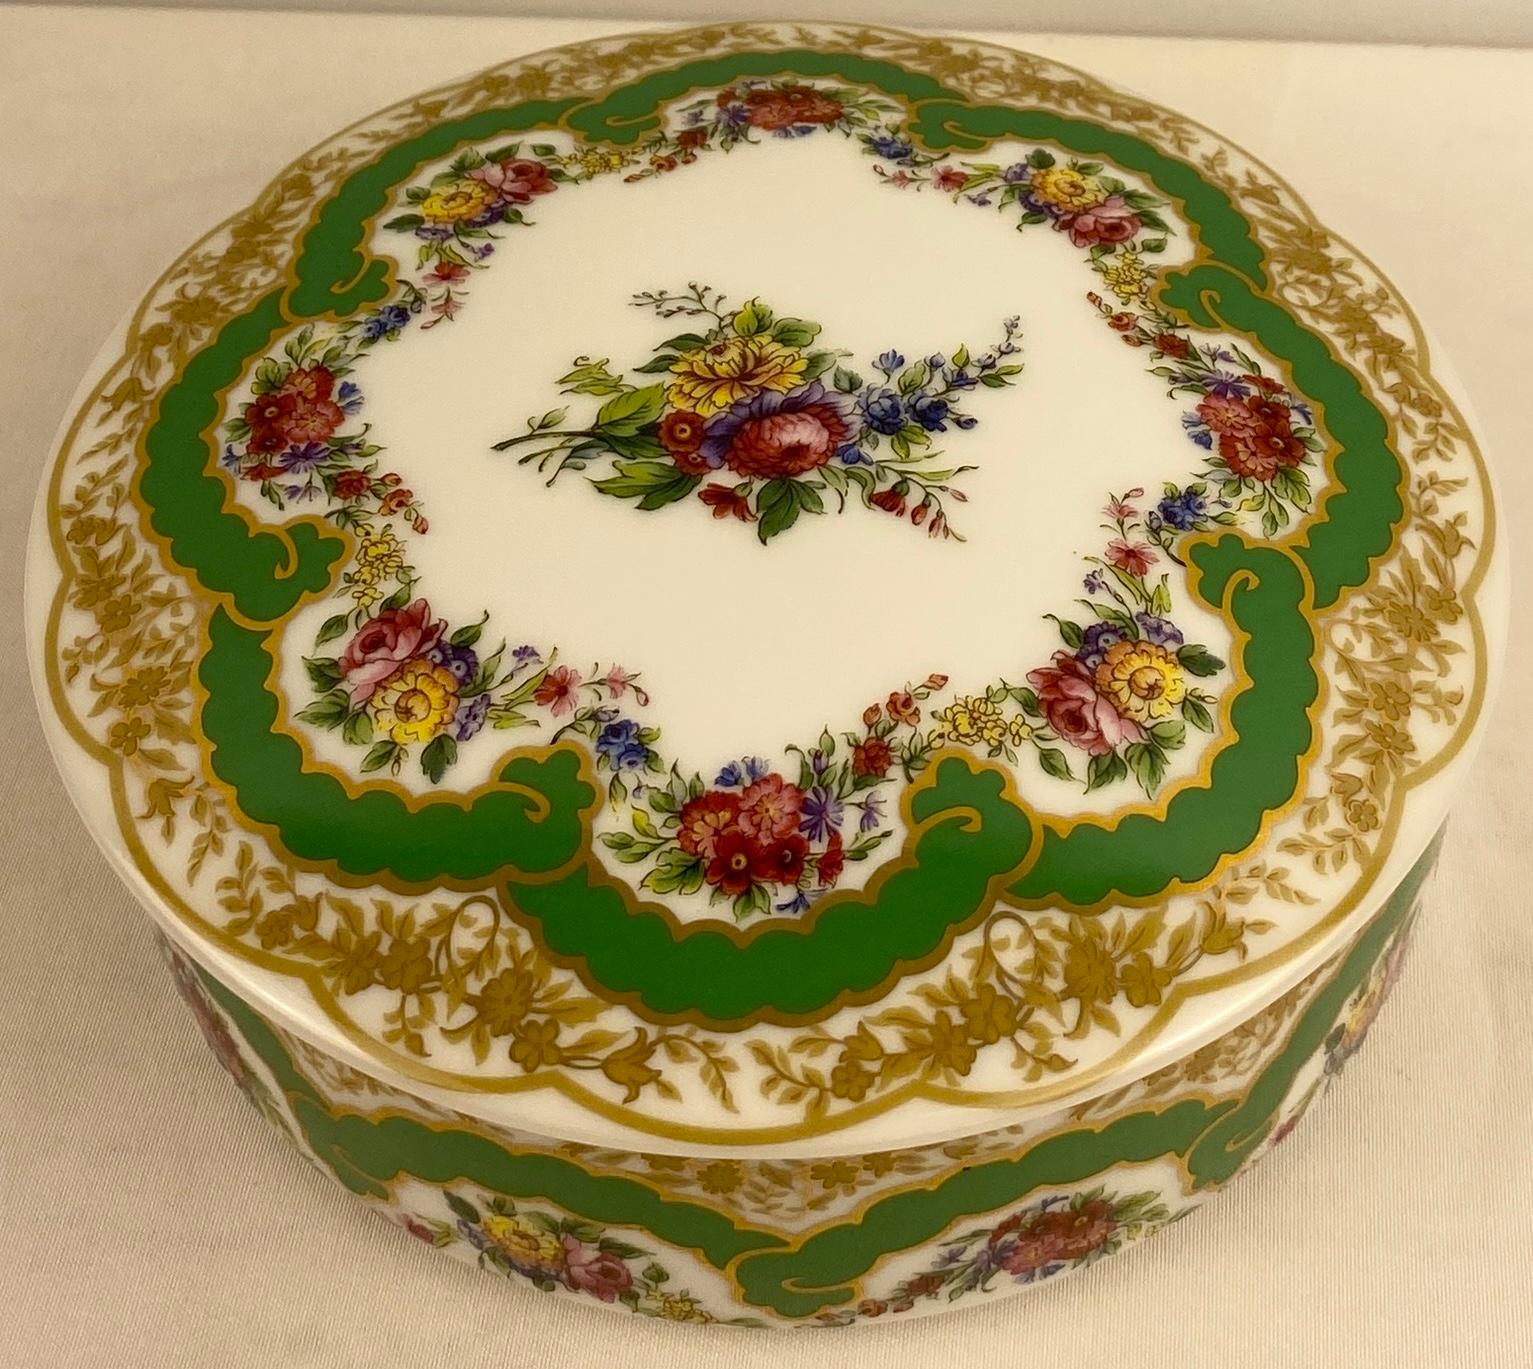 20th Century Sevres Style Porcelain Lidded Candy Dish or Jewelry Box For Sale